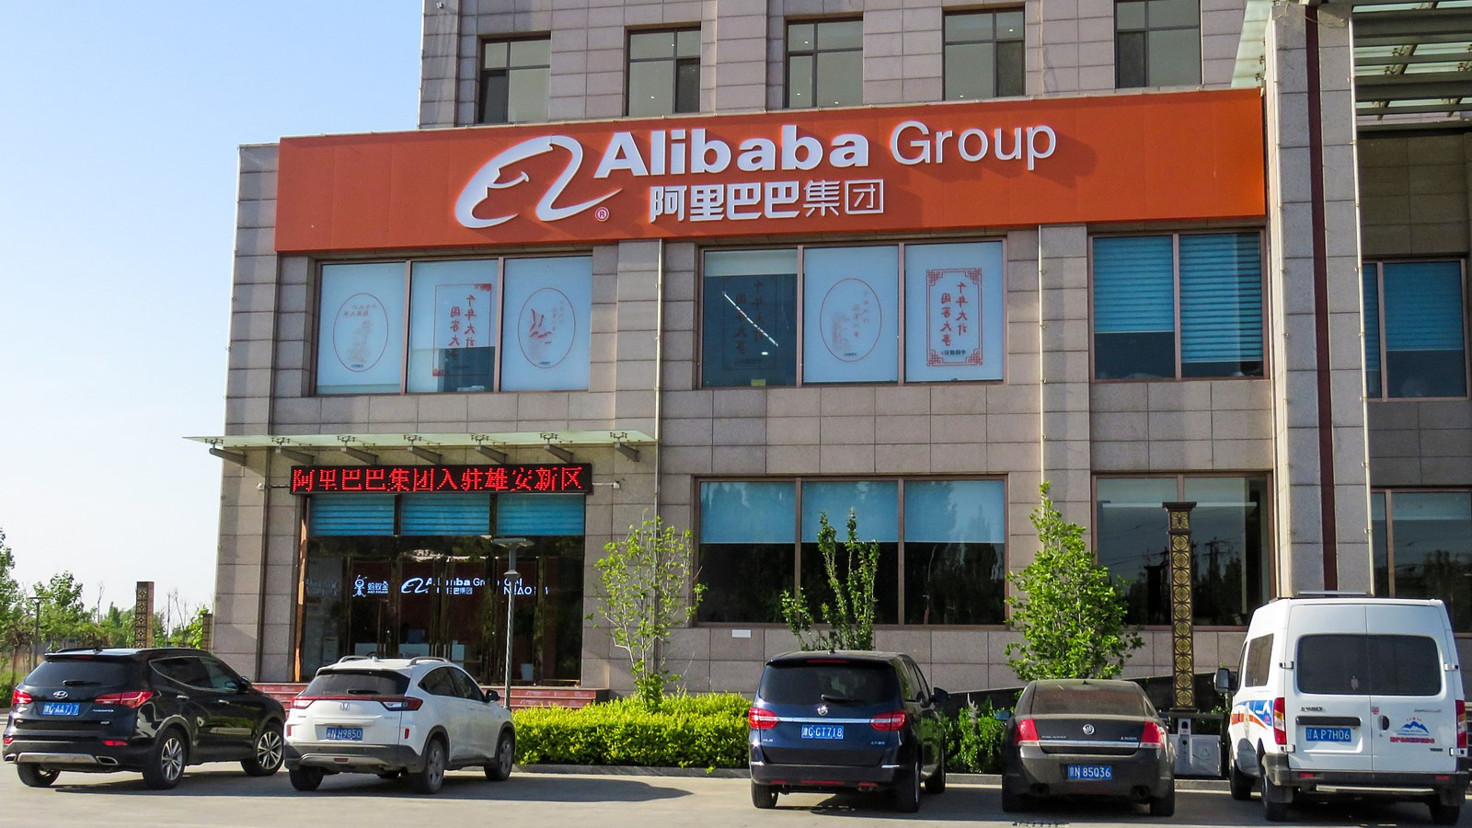 Alibaba shows strong performance in Q2 2019 despite the trade war